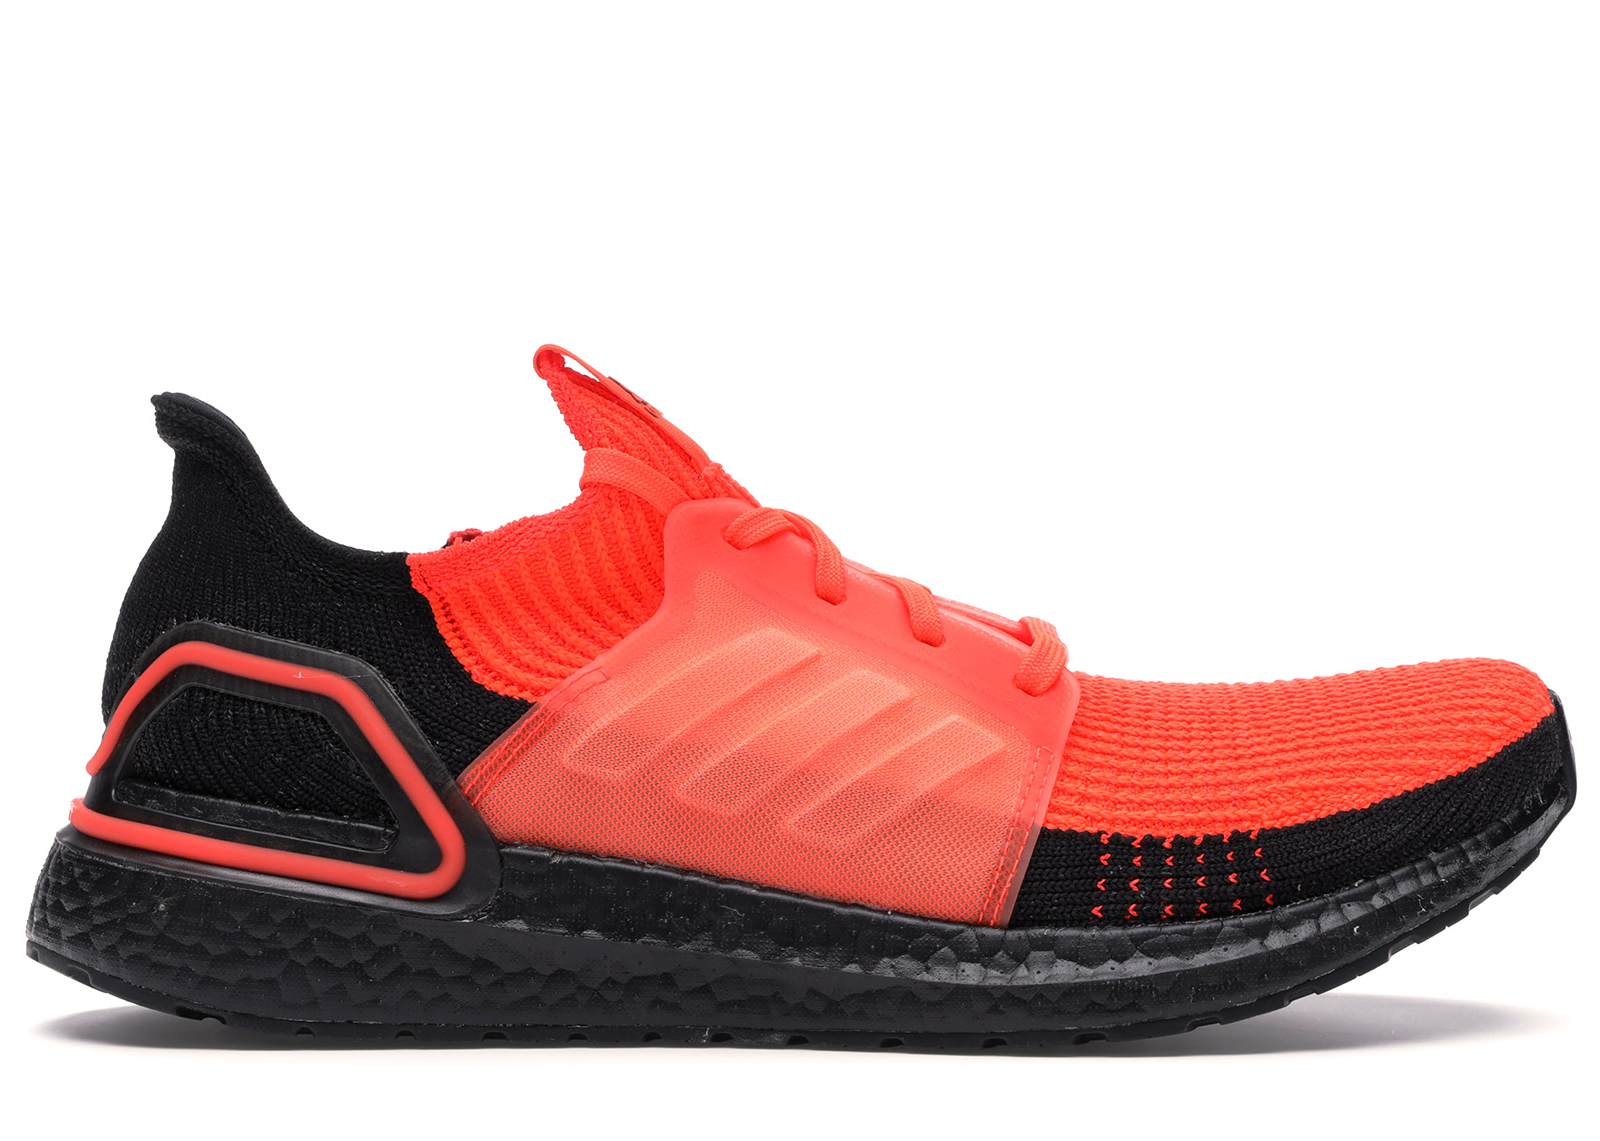 adidas pure boost solar red